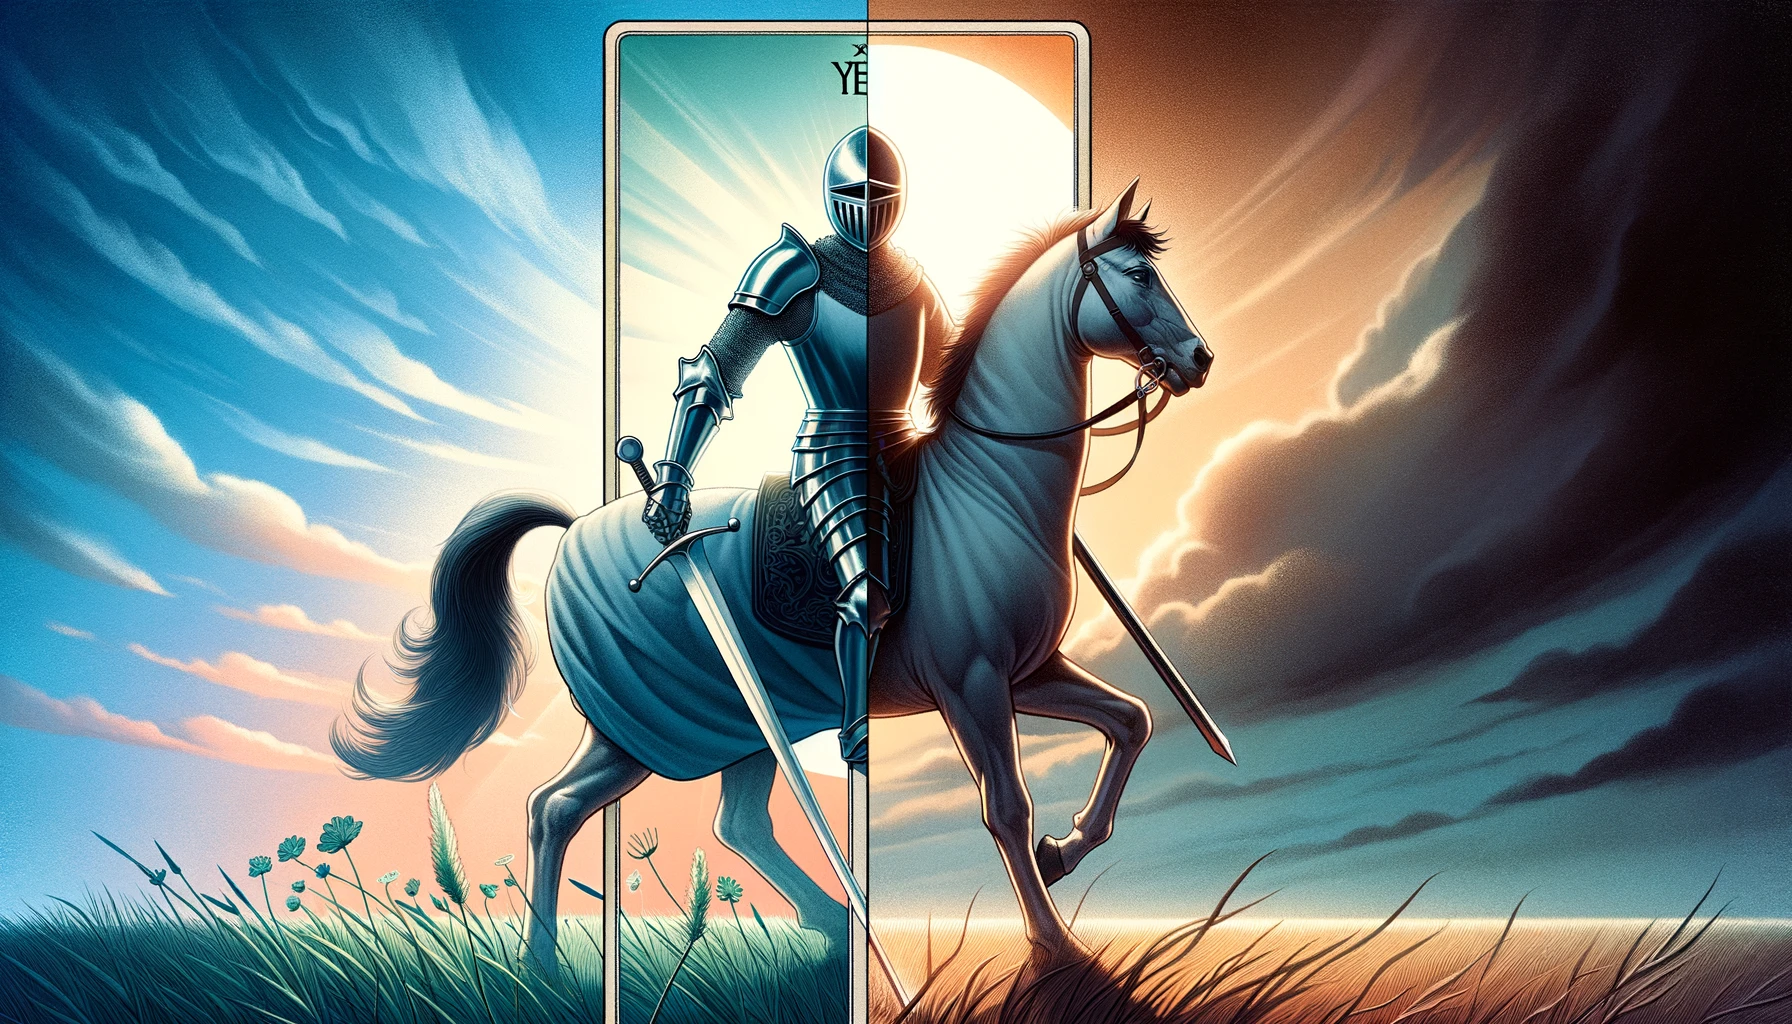 "An illustration depicting the Knight of Swords tarot card split into two sides, one symbolizing action and decisiveness ('Yes') and the other representing hesitation and reconsideration ('No'). The artwork enriches the article by visually illustrating the complexities and interpretive nuances of the Knight of Swords in tarot readings."